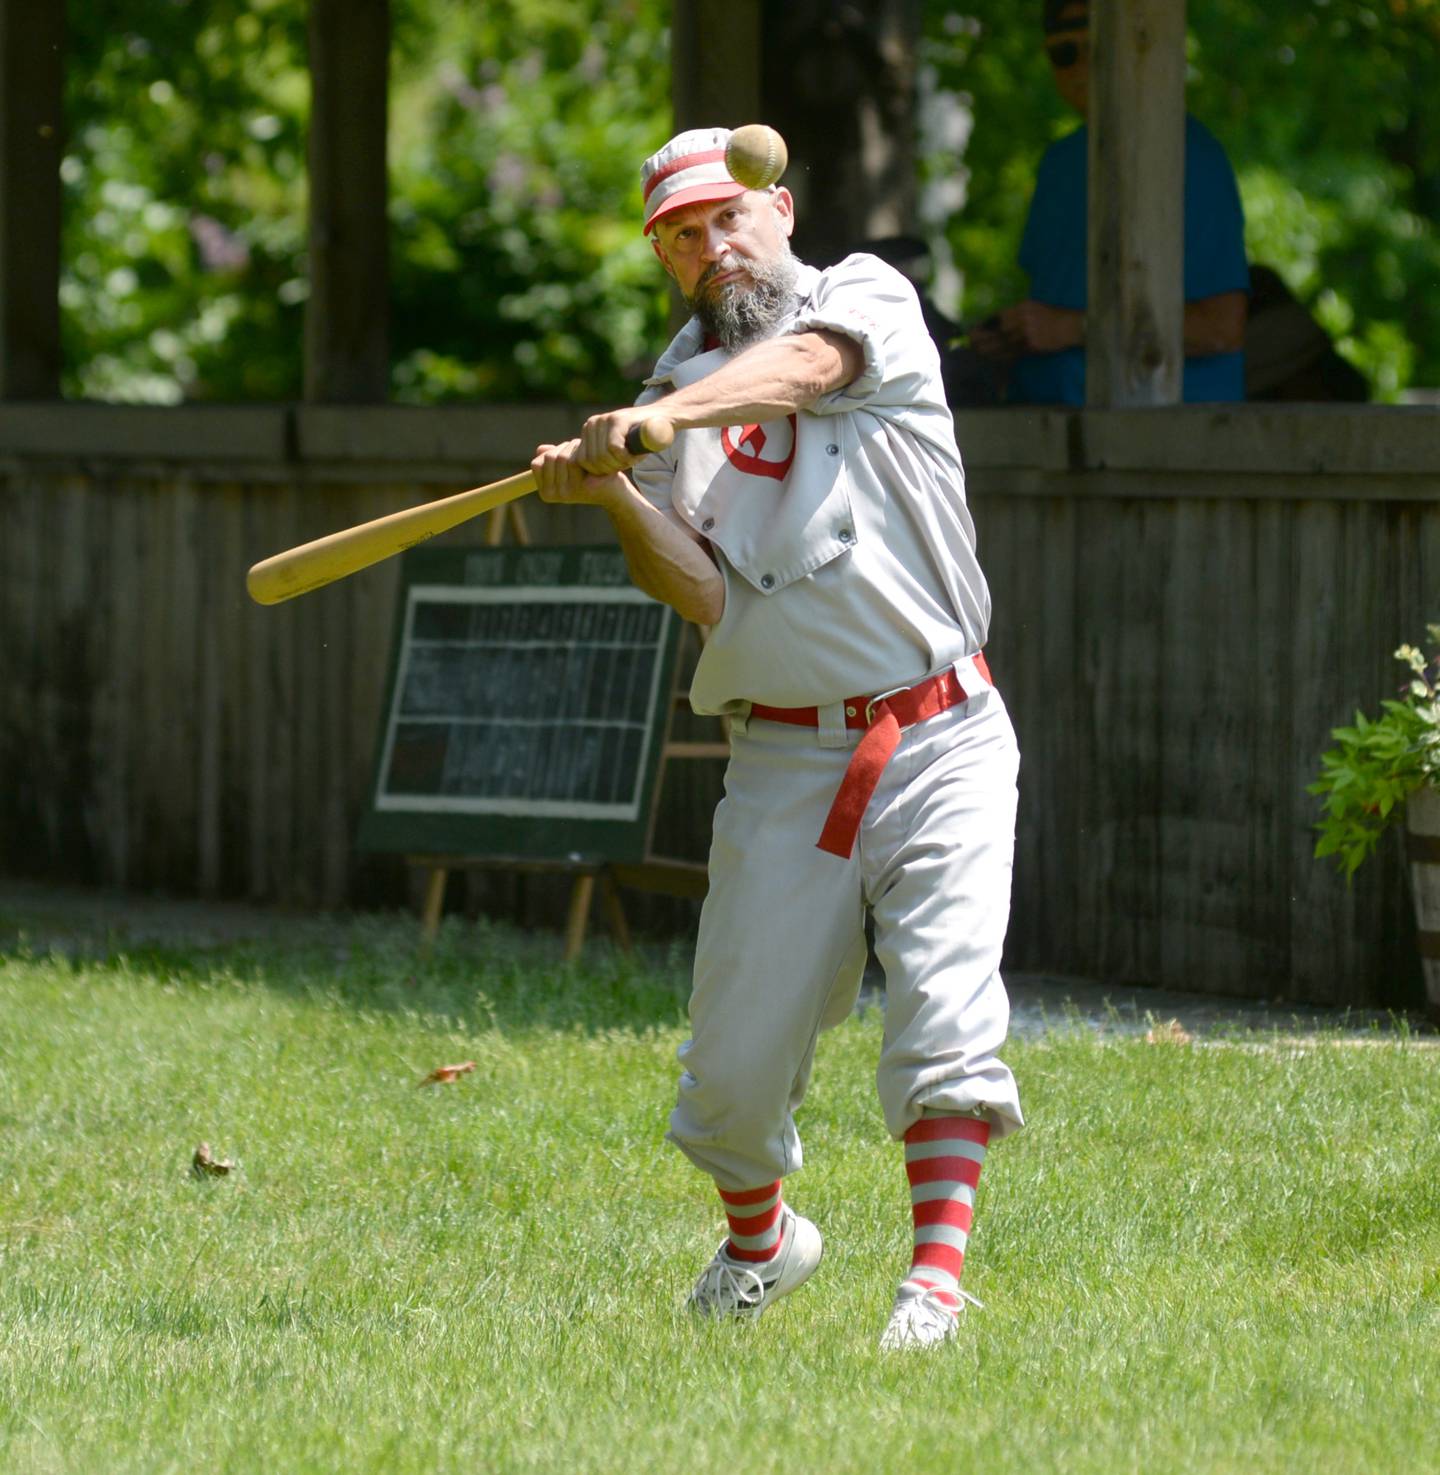 Mike "t-Bag" Thomas watches a pitch as he bats for the Oregon Ganymedes Vintage Base Ball team during a game with the DuPage Plowboys on Saturday, June 3 at the John Deere Historic Site in Grand Detour.